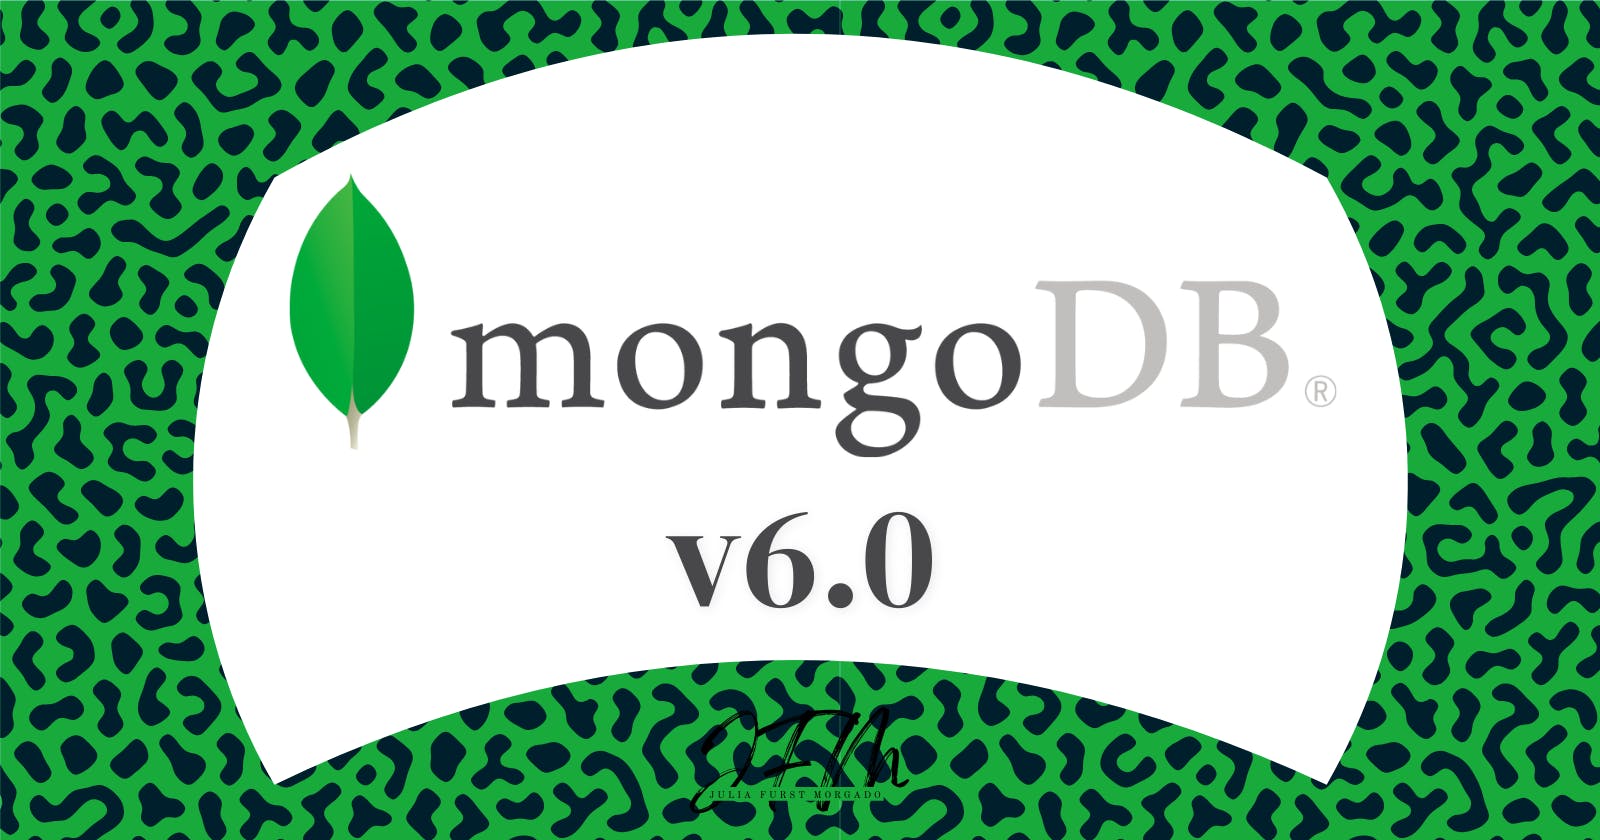 See what's new with MongoDB 6.0